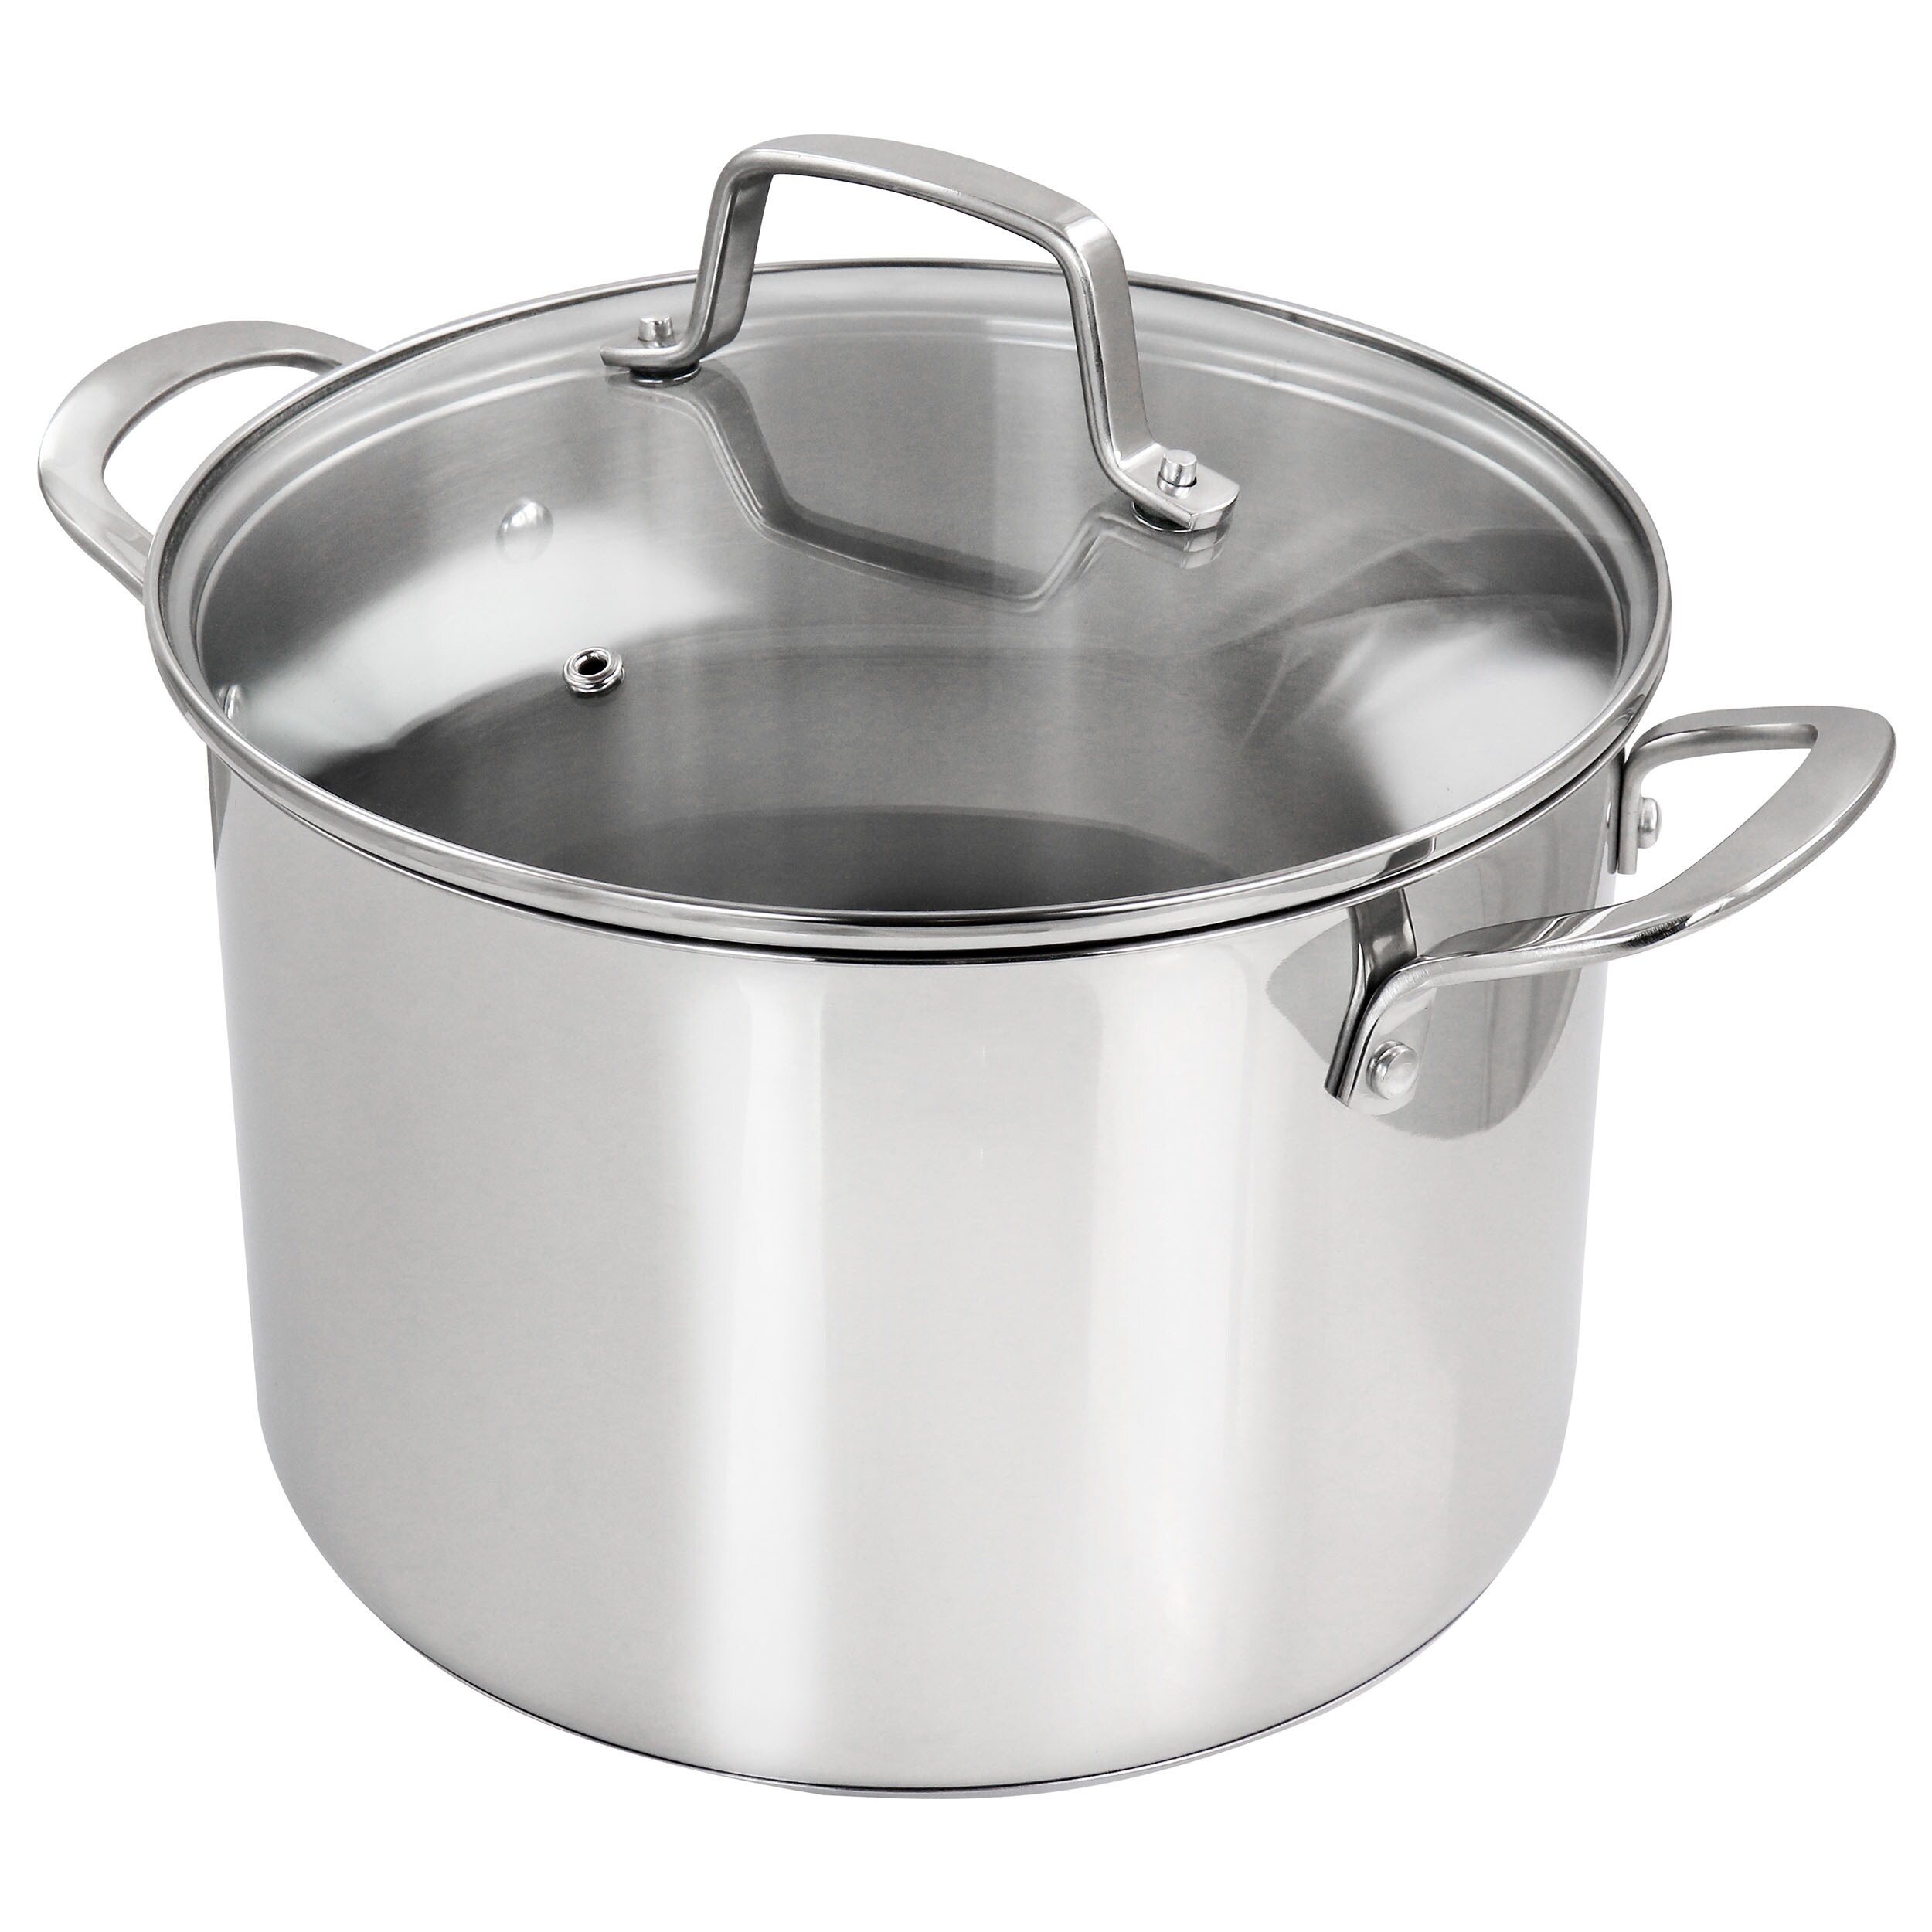 https://ak1.ostkcdn.com/images/products/is/images/direct/5954df7f428864d4e008eab40bd0d984db2d9b20/Martha-Stewart-8-Quart-Castelle-Stainless-Steel-Dutch-Oven-with-Lid.jpg